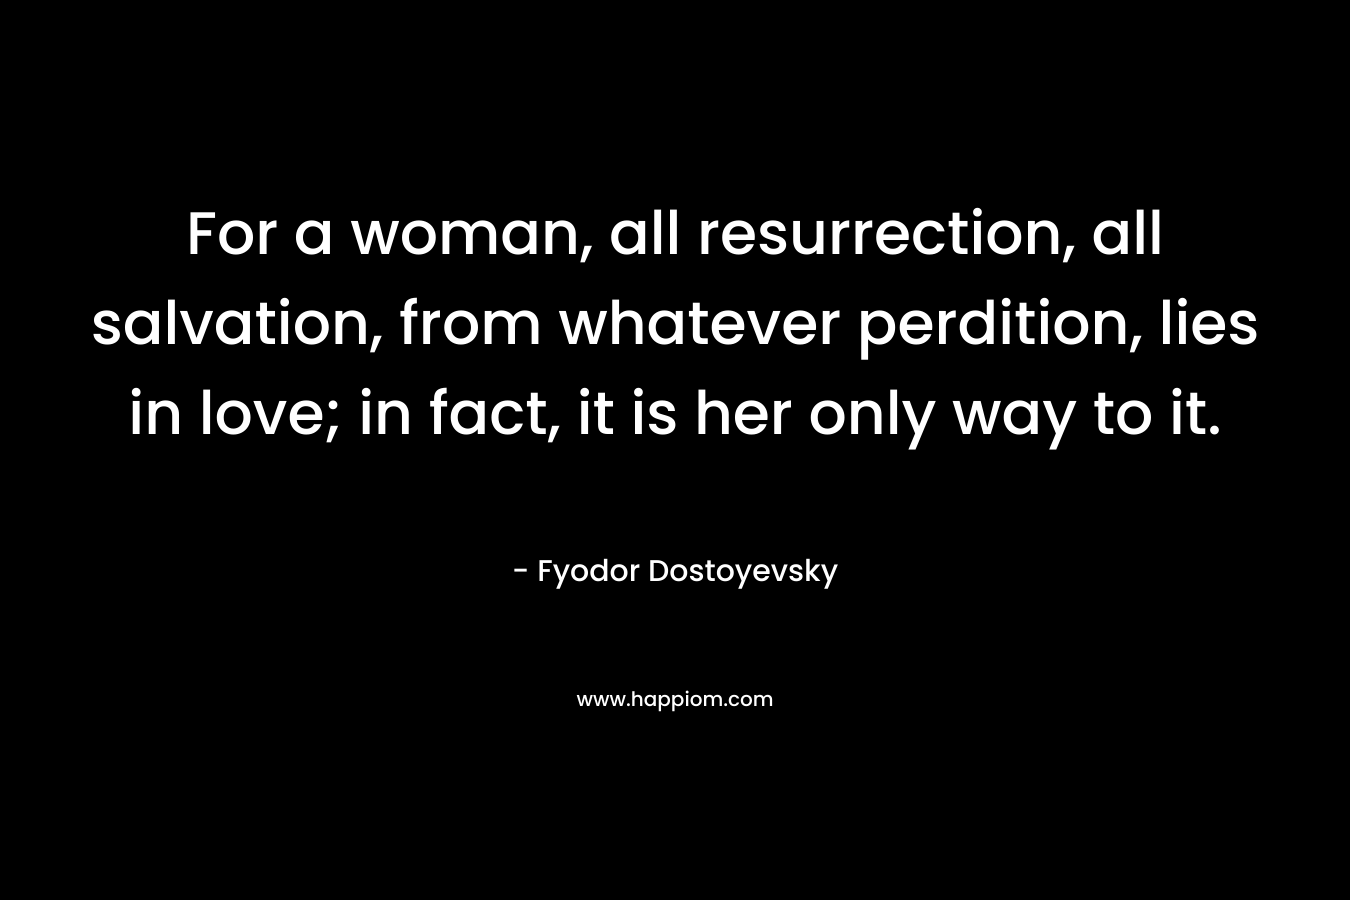 For a woman, all resurrection, all salvation, from whatever perdition, lies in love; in fact, it is her only way to it.